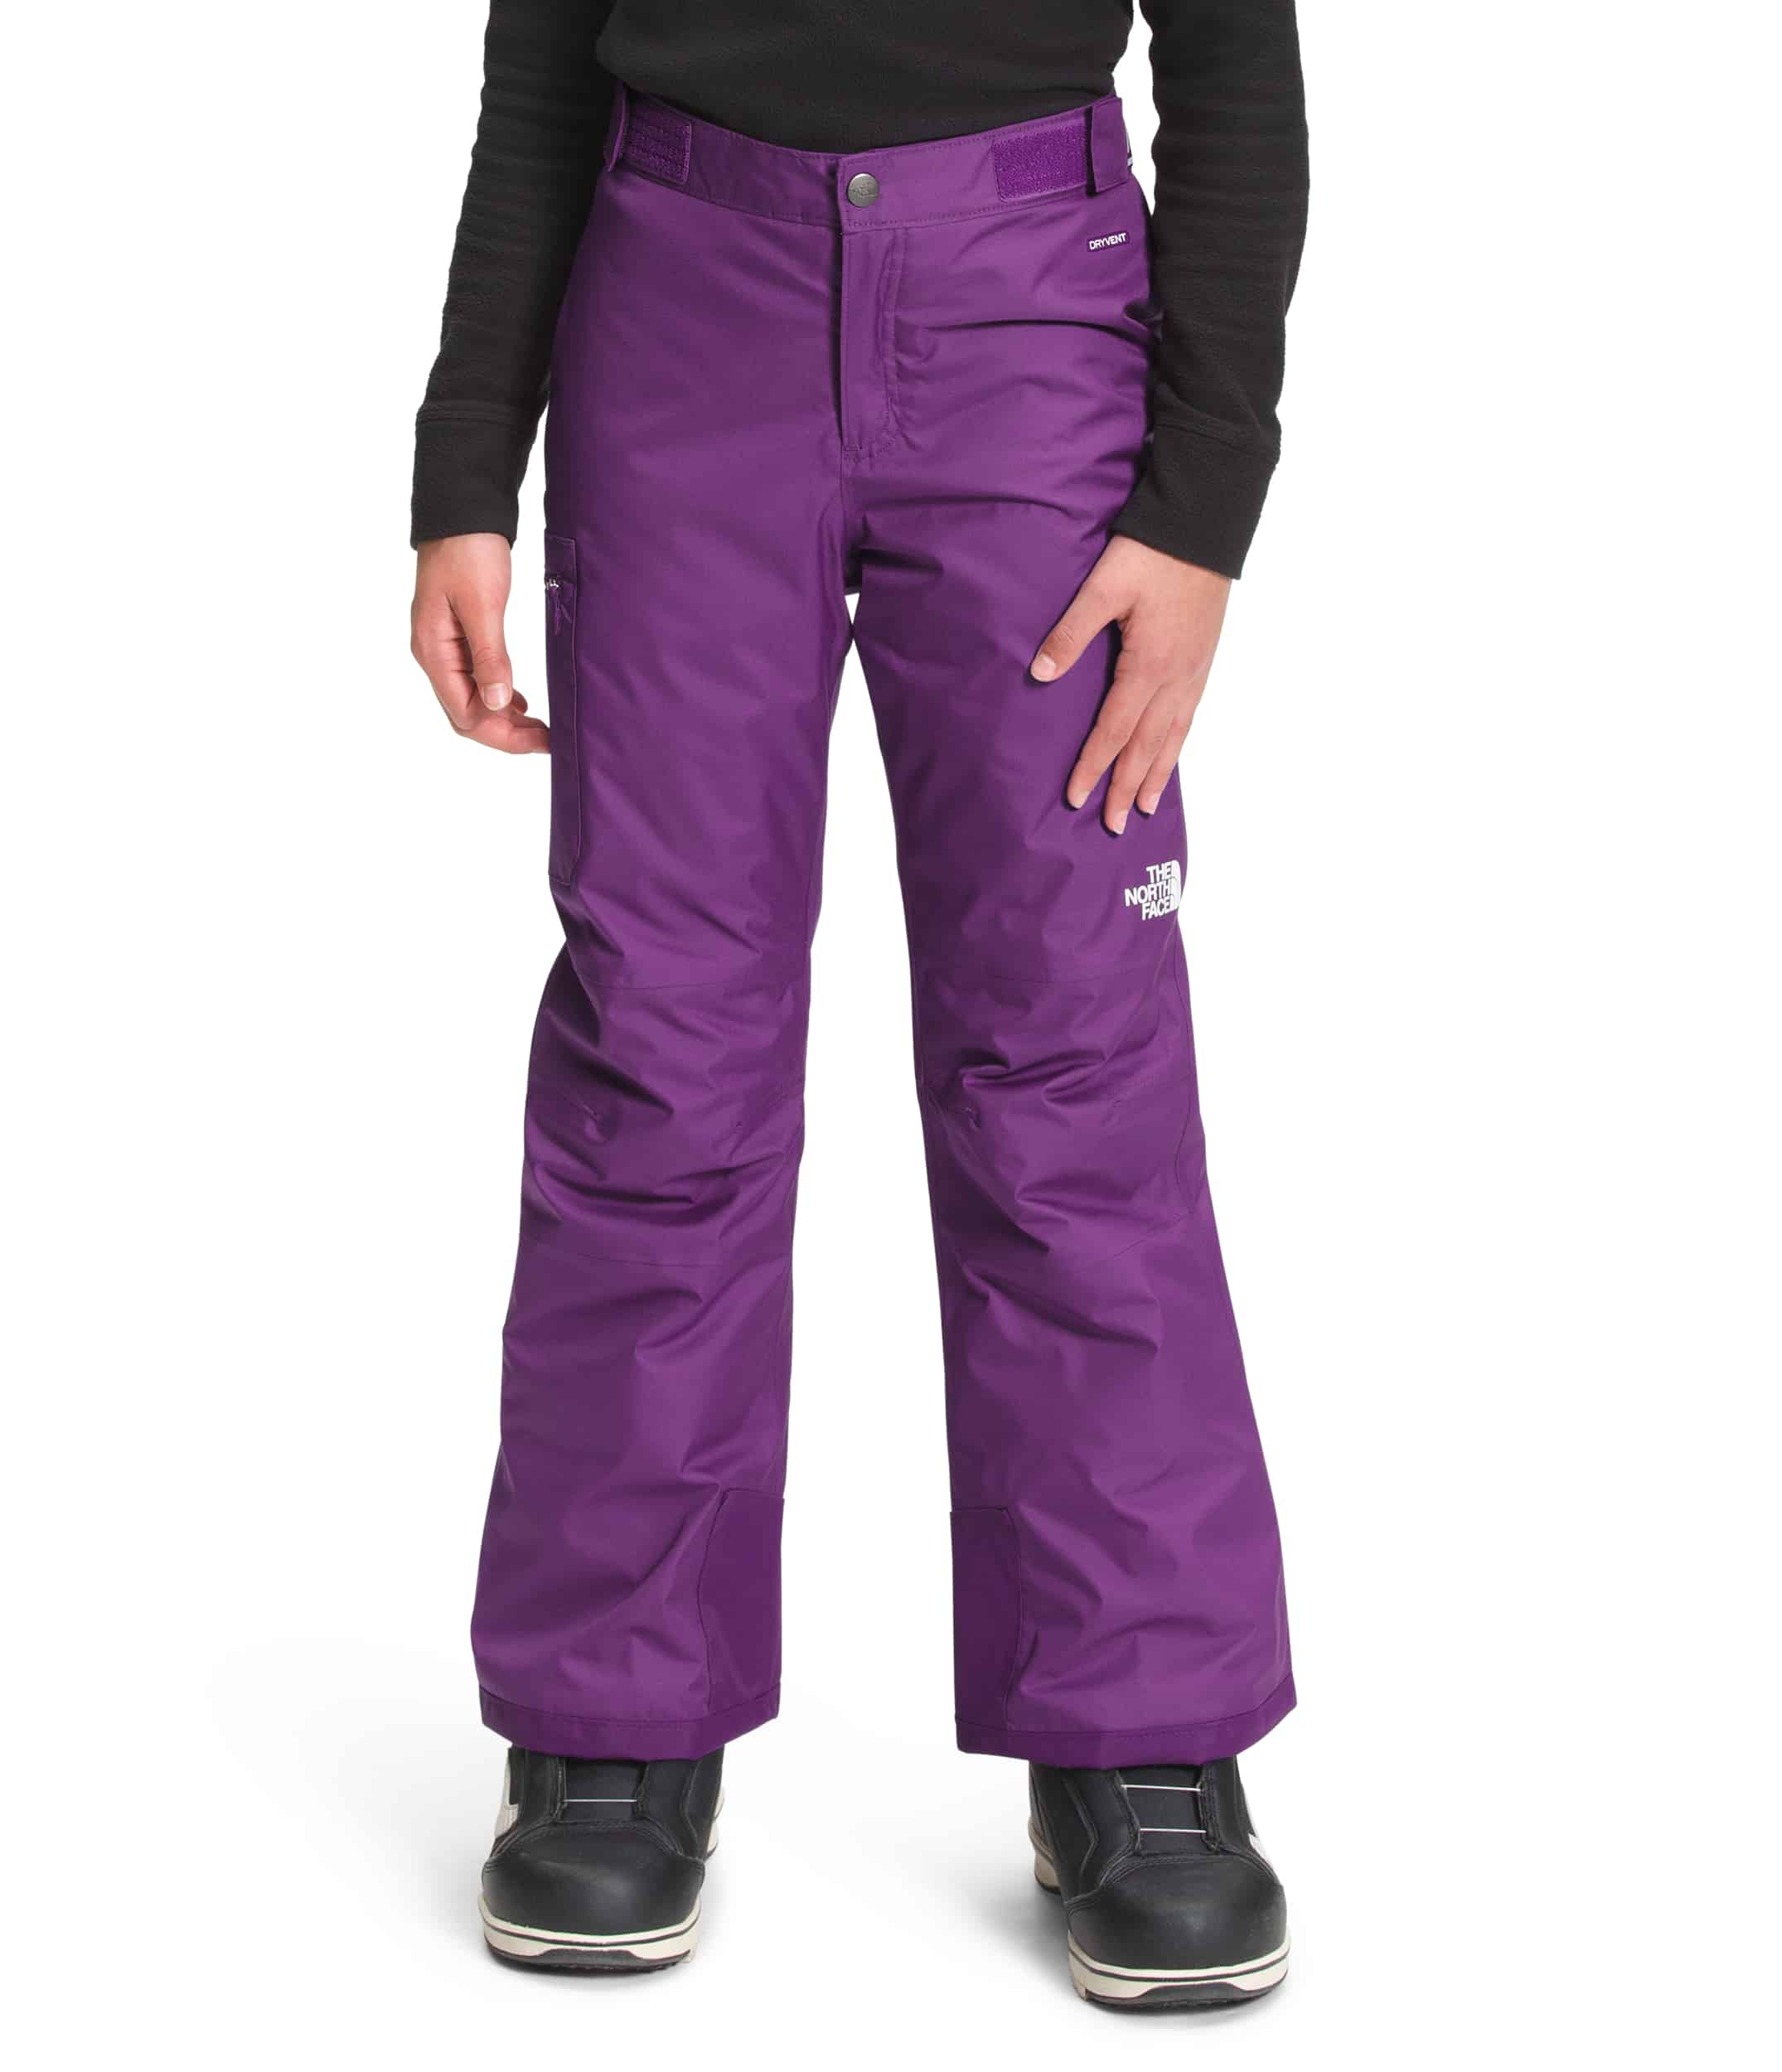 Prairie Summit Shop - The North Face Girls Freedom Insulated Pant